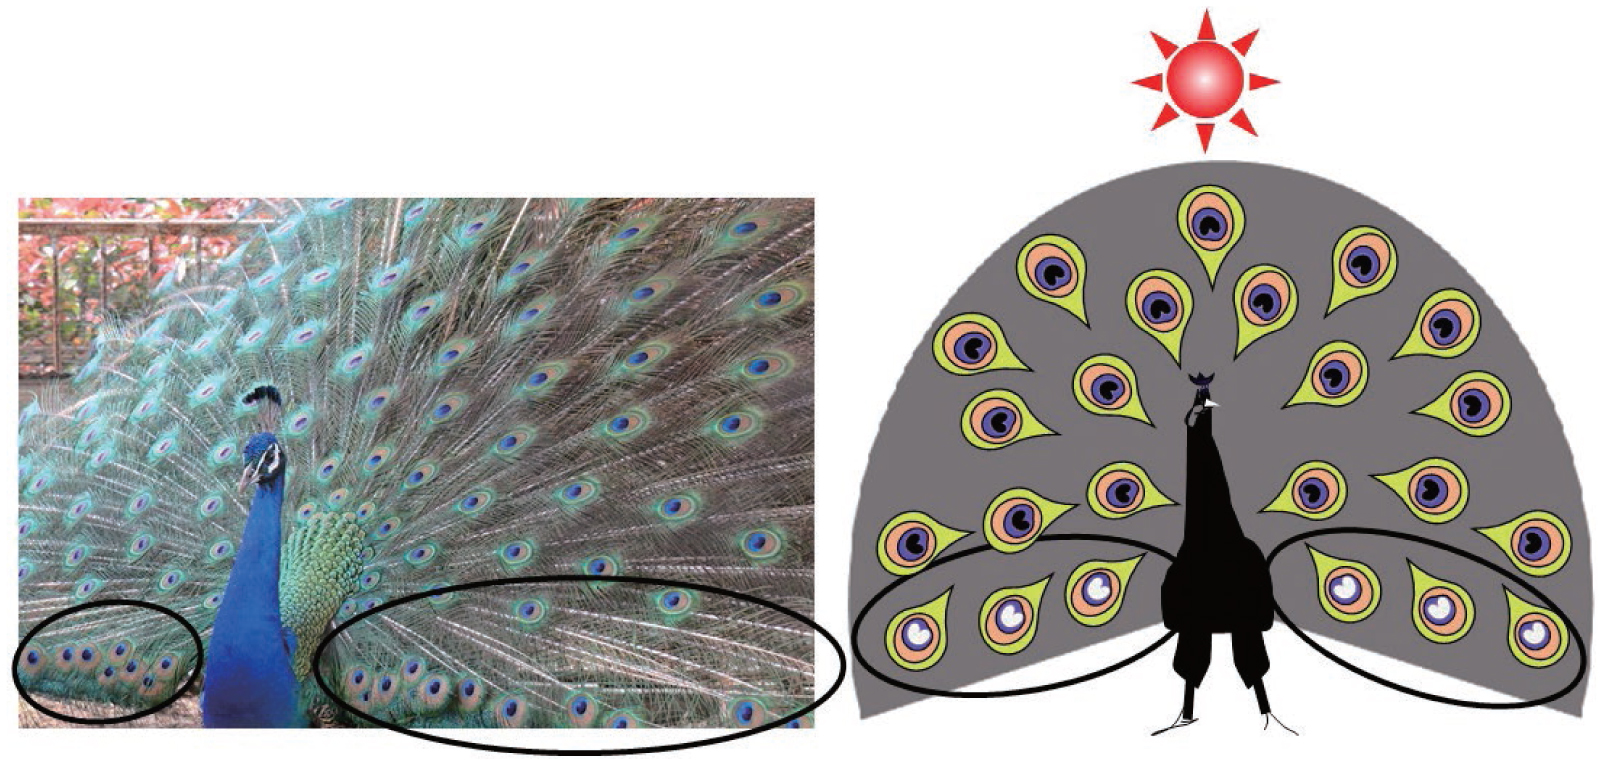 New Nanonetwork Material Replicates the Structure of Bird Feathers